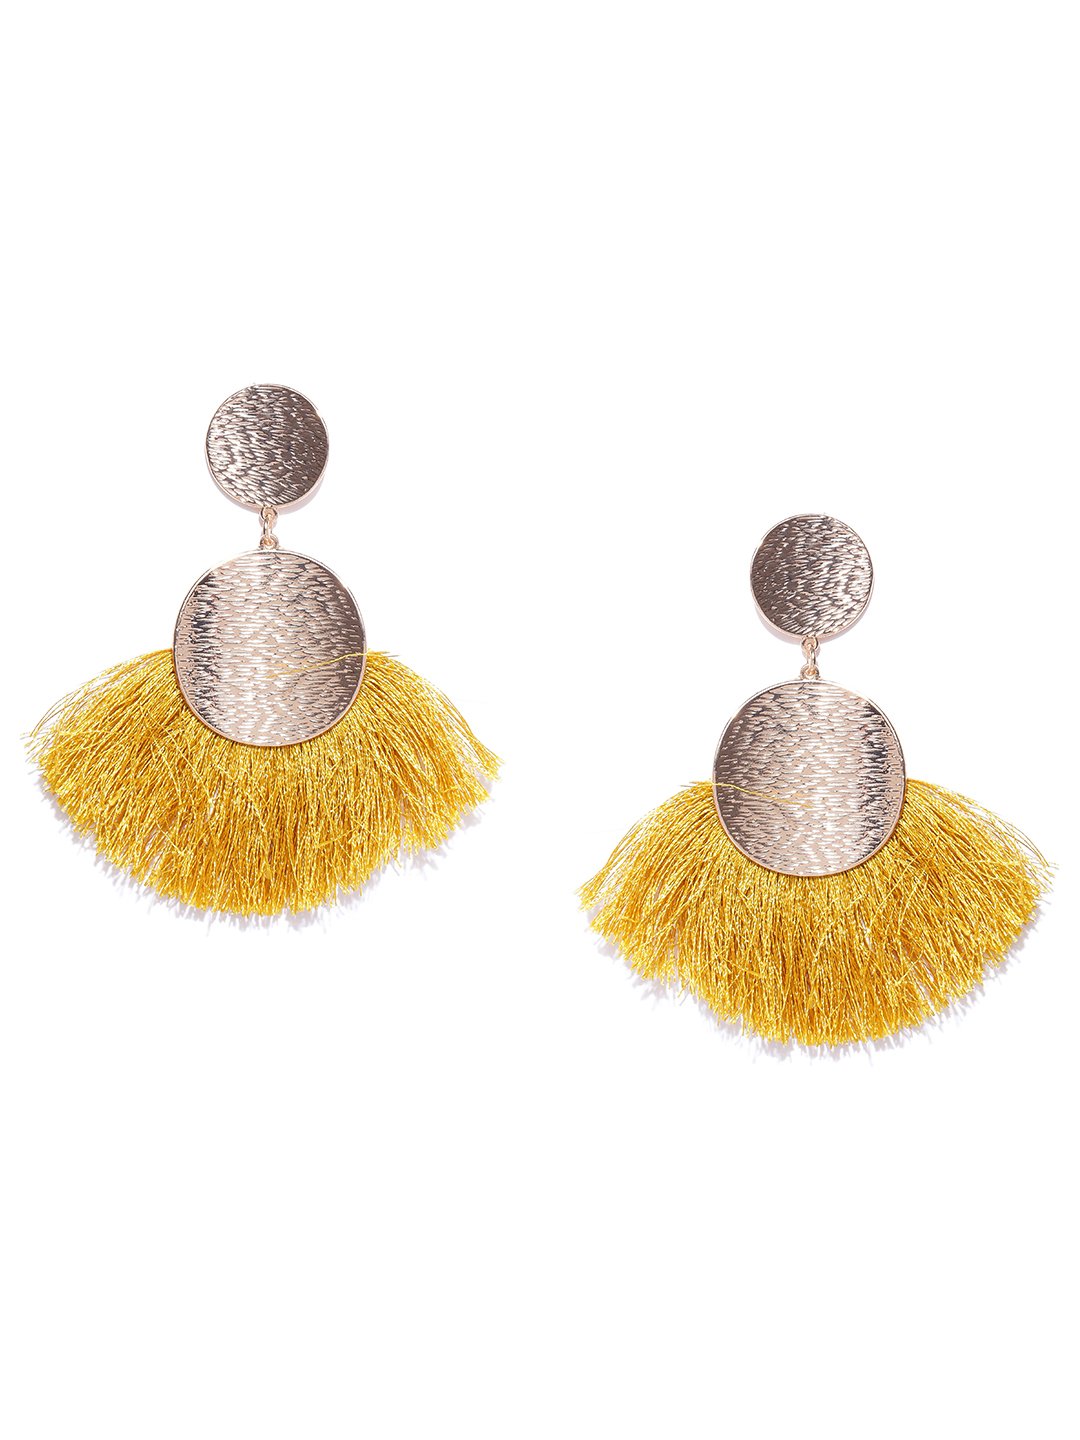 Blueberry gold and yellow fringes drop earrings